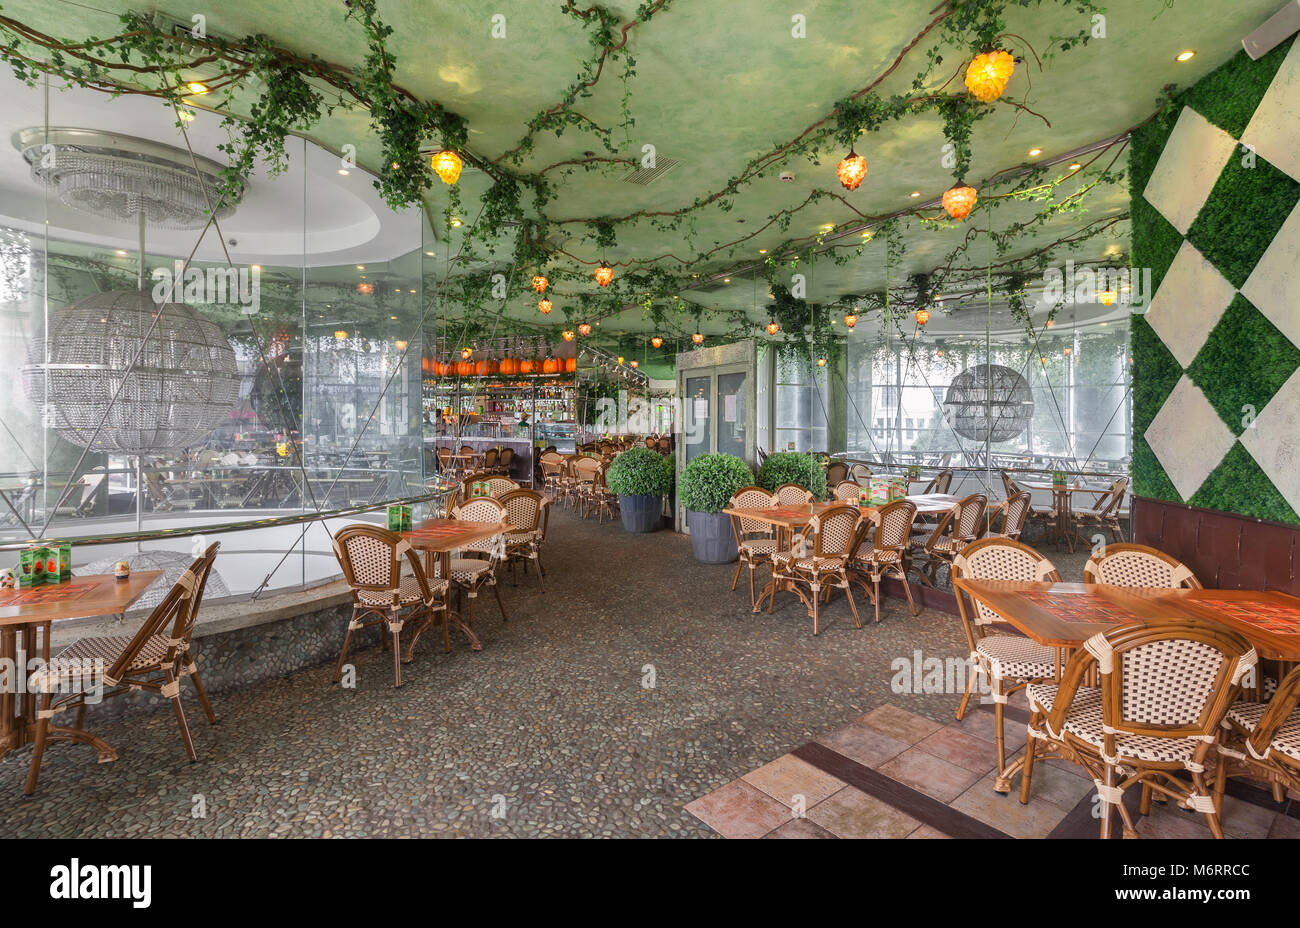 MOSCOW - JULY 2014: Chain home cooking restaurant 'GRABLI'. The interior of the concept of landscape gardening style. Artificial vines on the ceiling Stock Photo